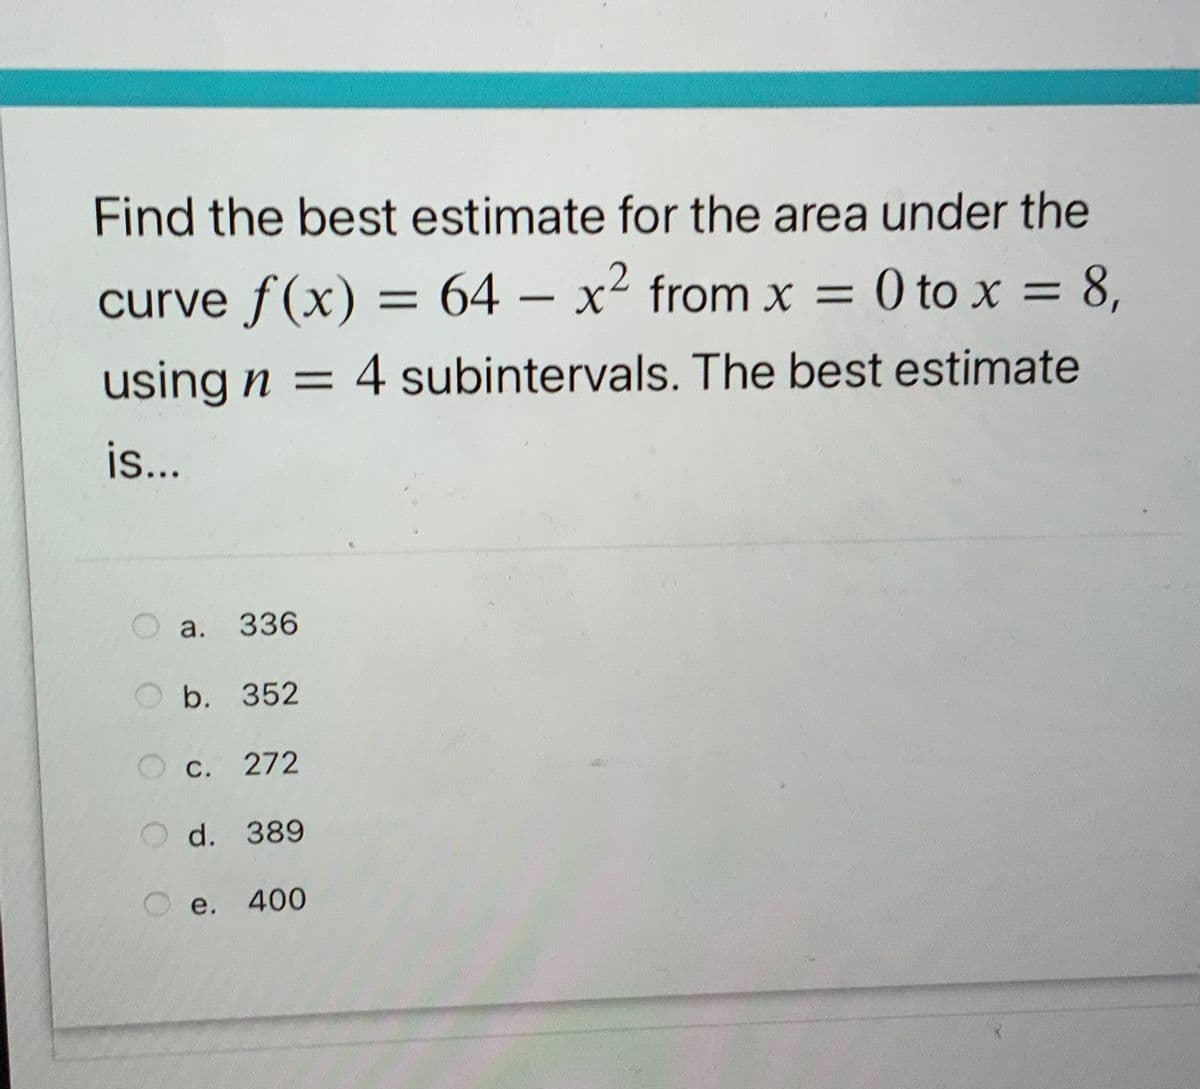 Find the best estimate for the area under the
curve f(x) = 64 – x² from x = 0 to x = 8,
-
using n = 4 subintervals. The best estimate
is..
а. 336
O b. 352
С. 272
d. 389
е.
400
